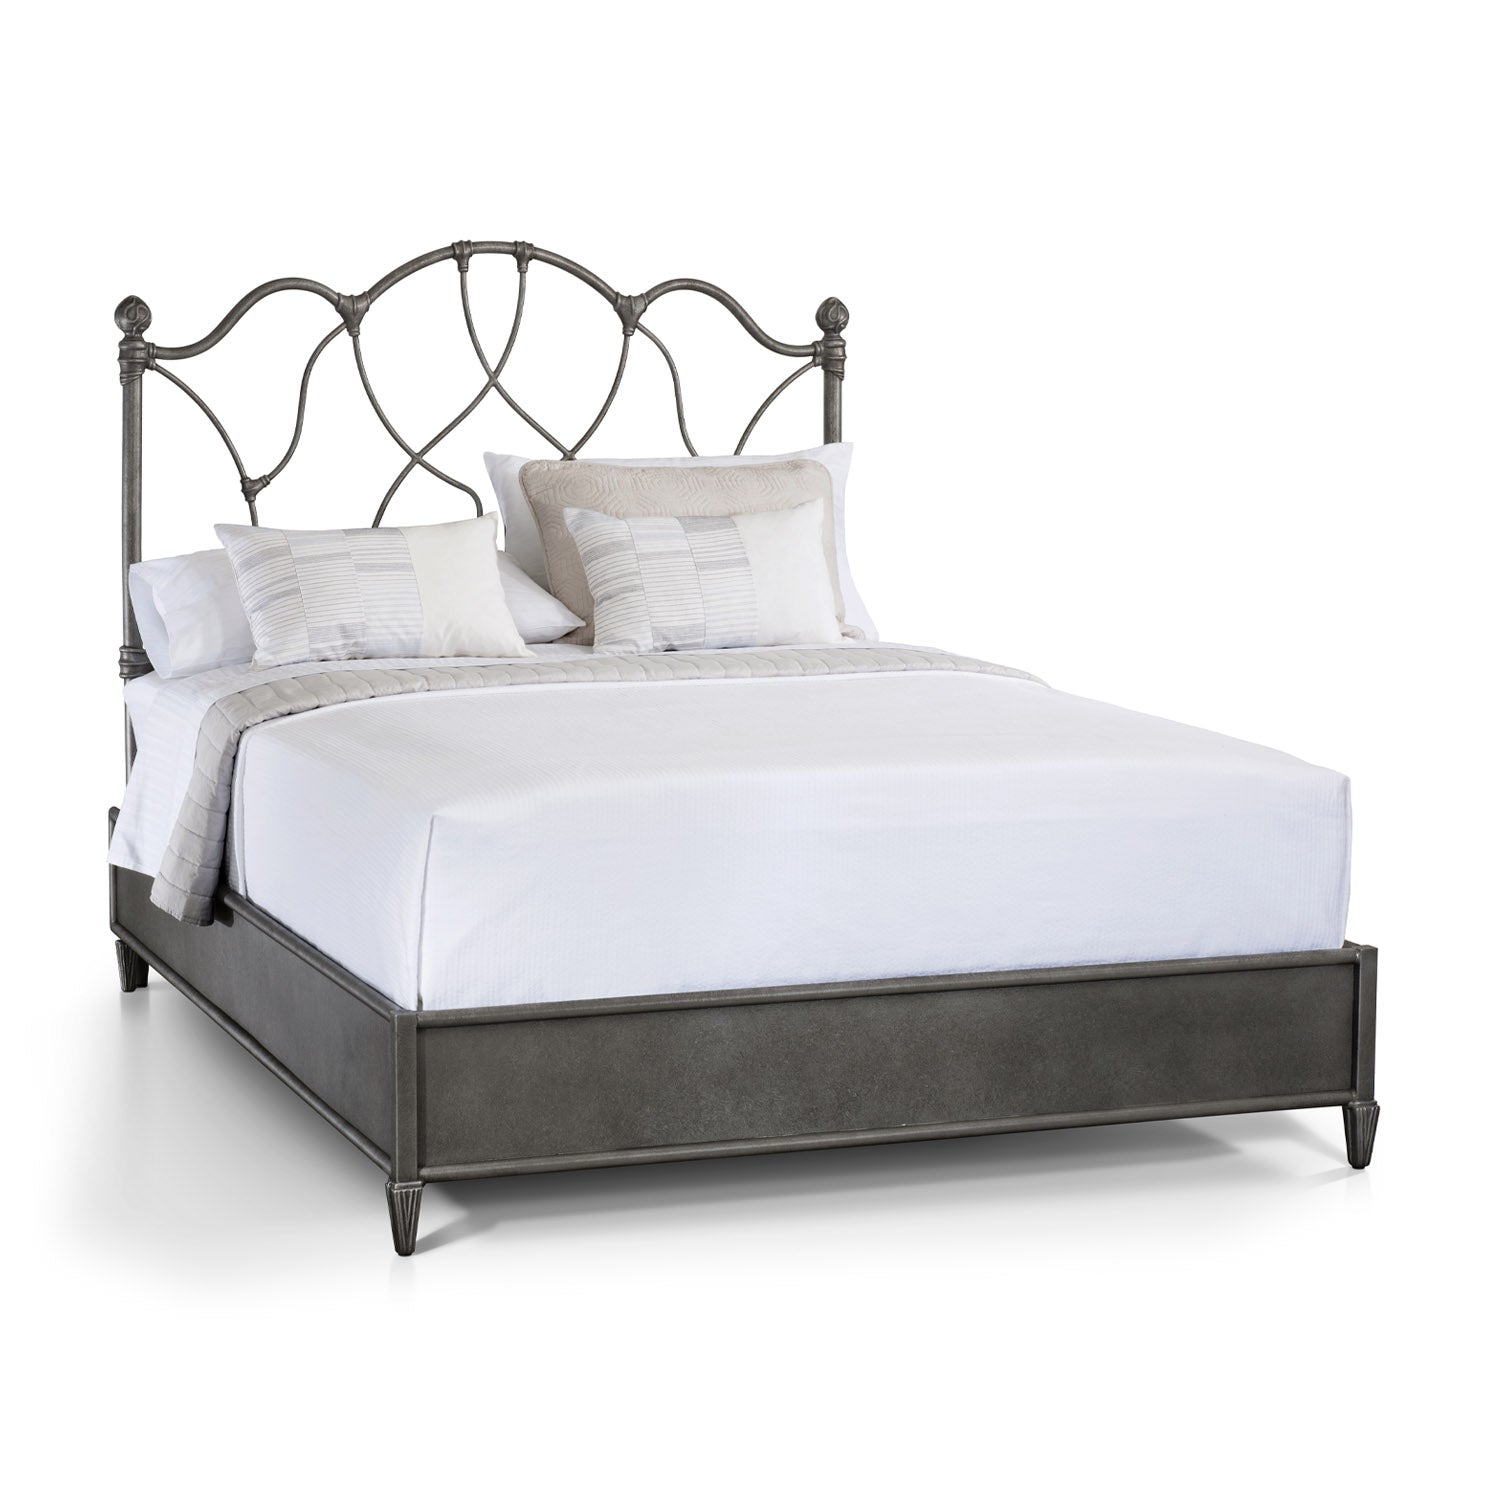 Morsley Cast Iron Bed Frame with Surround Frame